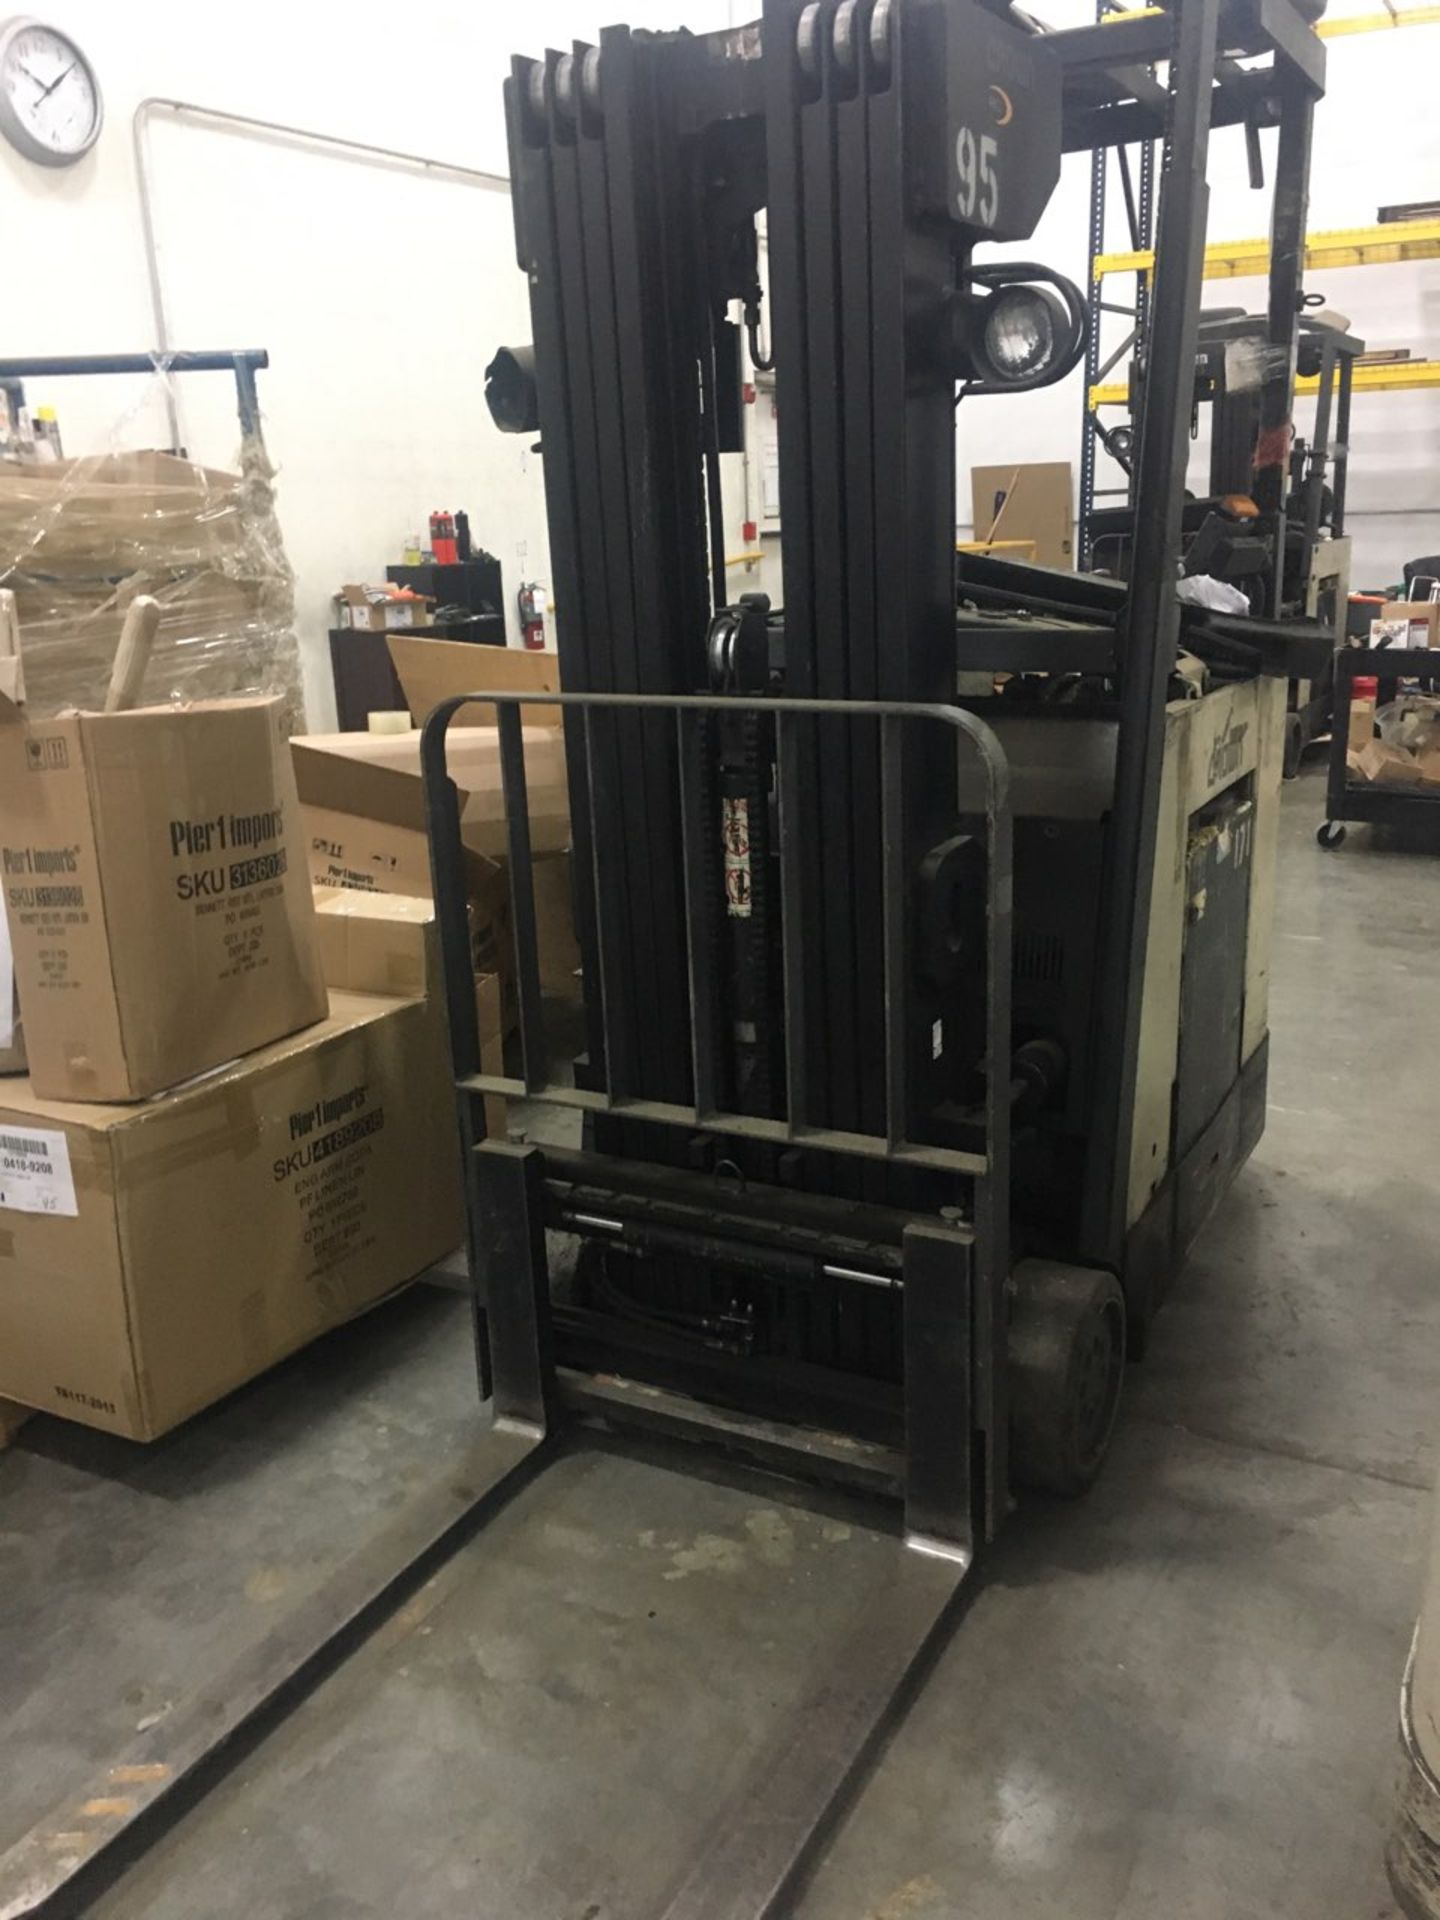 2000 CROWN STAND-UP FORKLIFT, 4,000 LB. CAP., MODEL: RC3020-40, 36V., S/N 1A235019, #95, (LISTED - Image 3 of 3